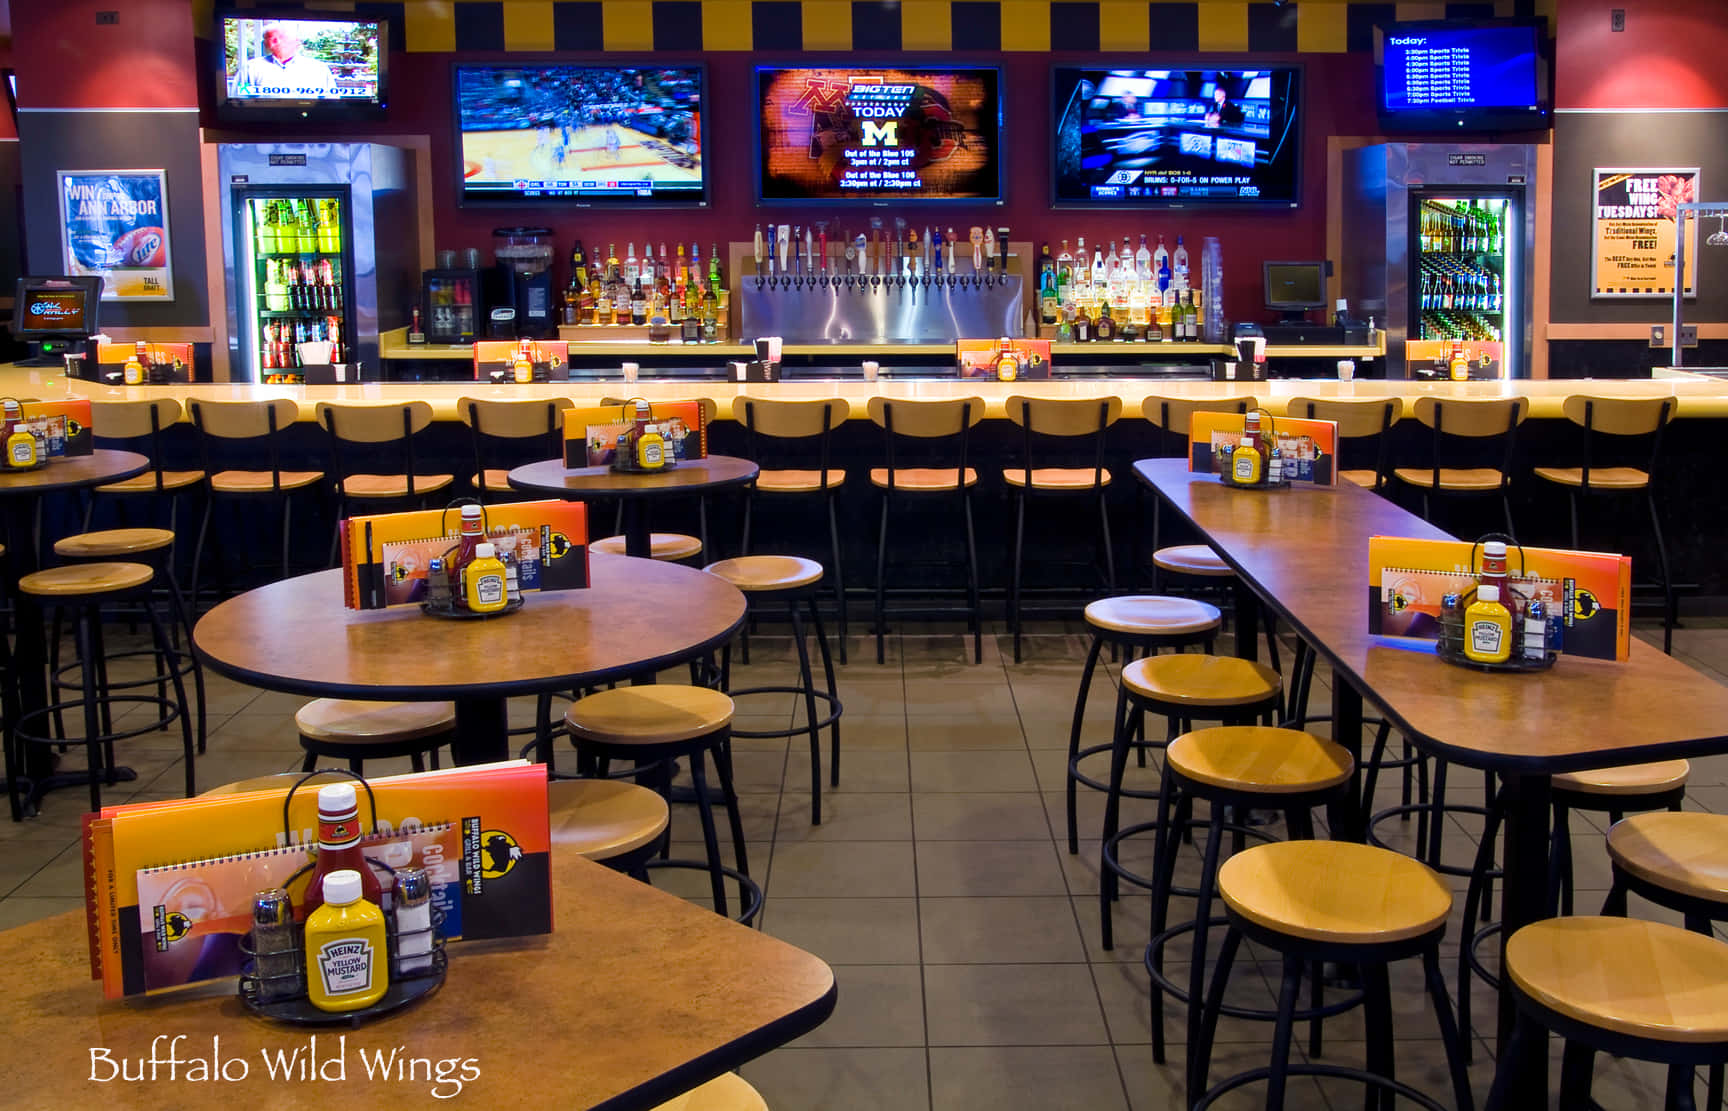 Experience the authentic taste of Buffalo Wild Wings